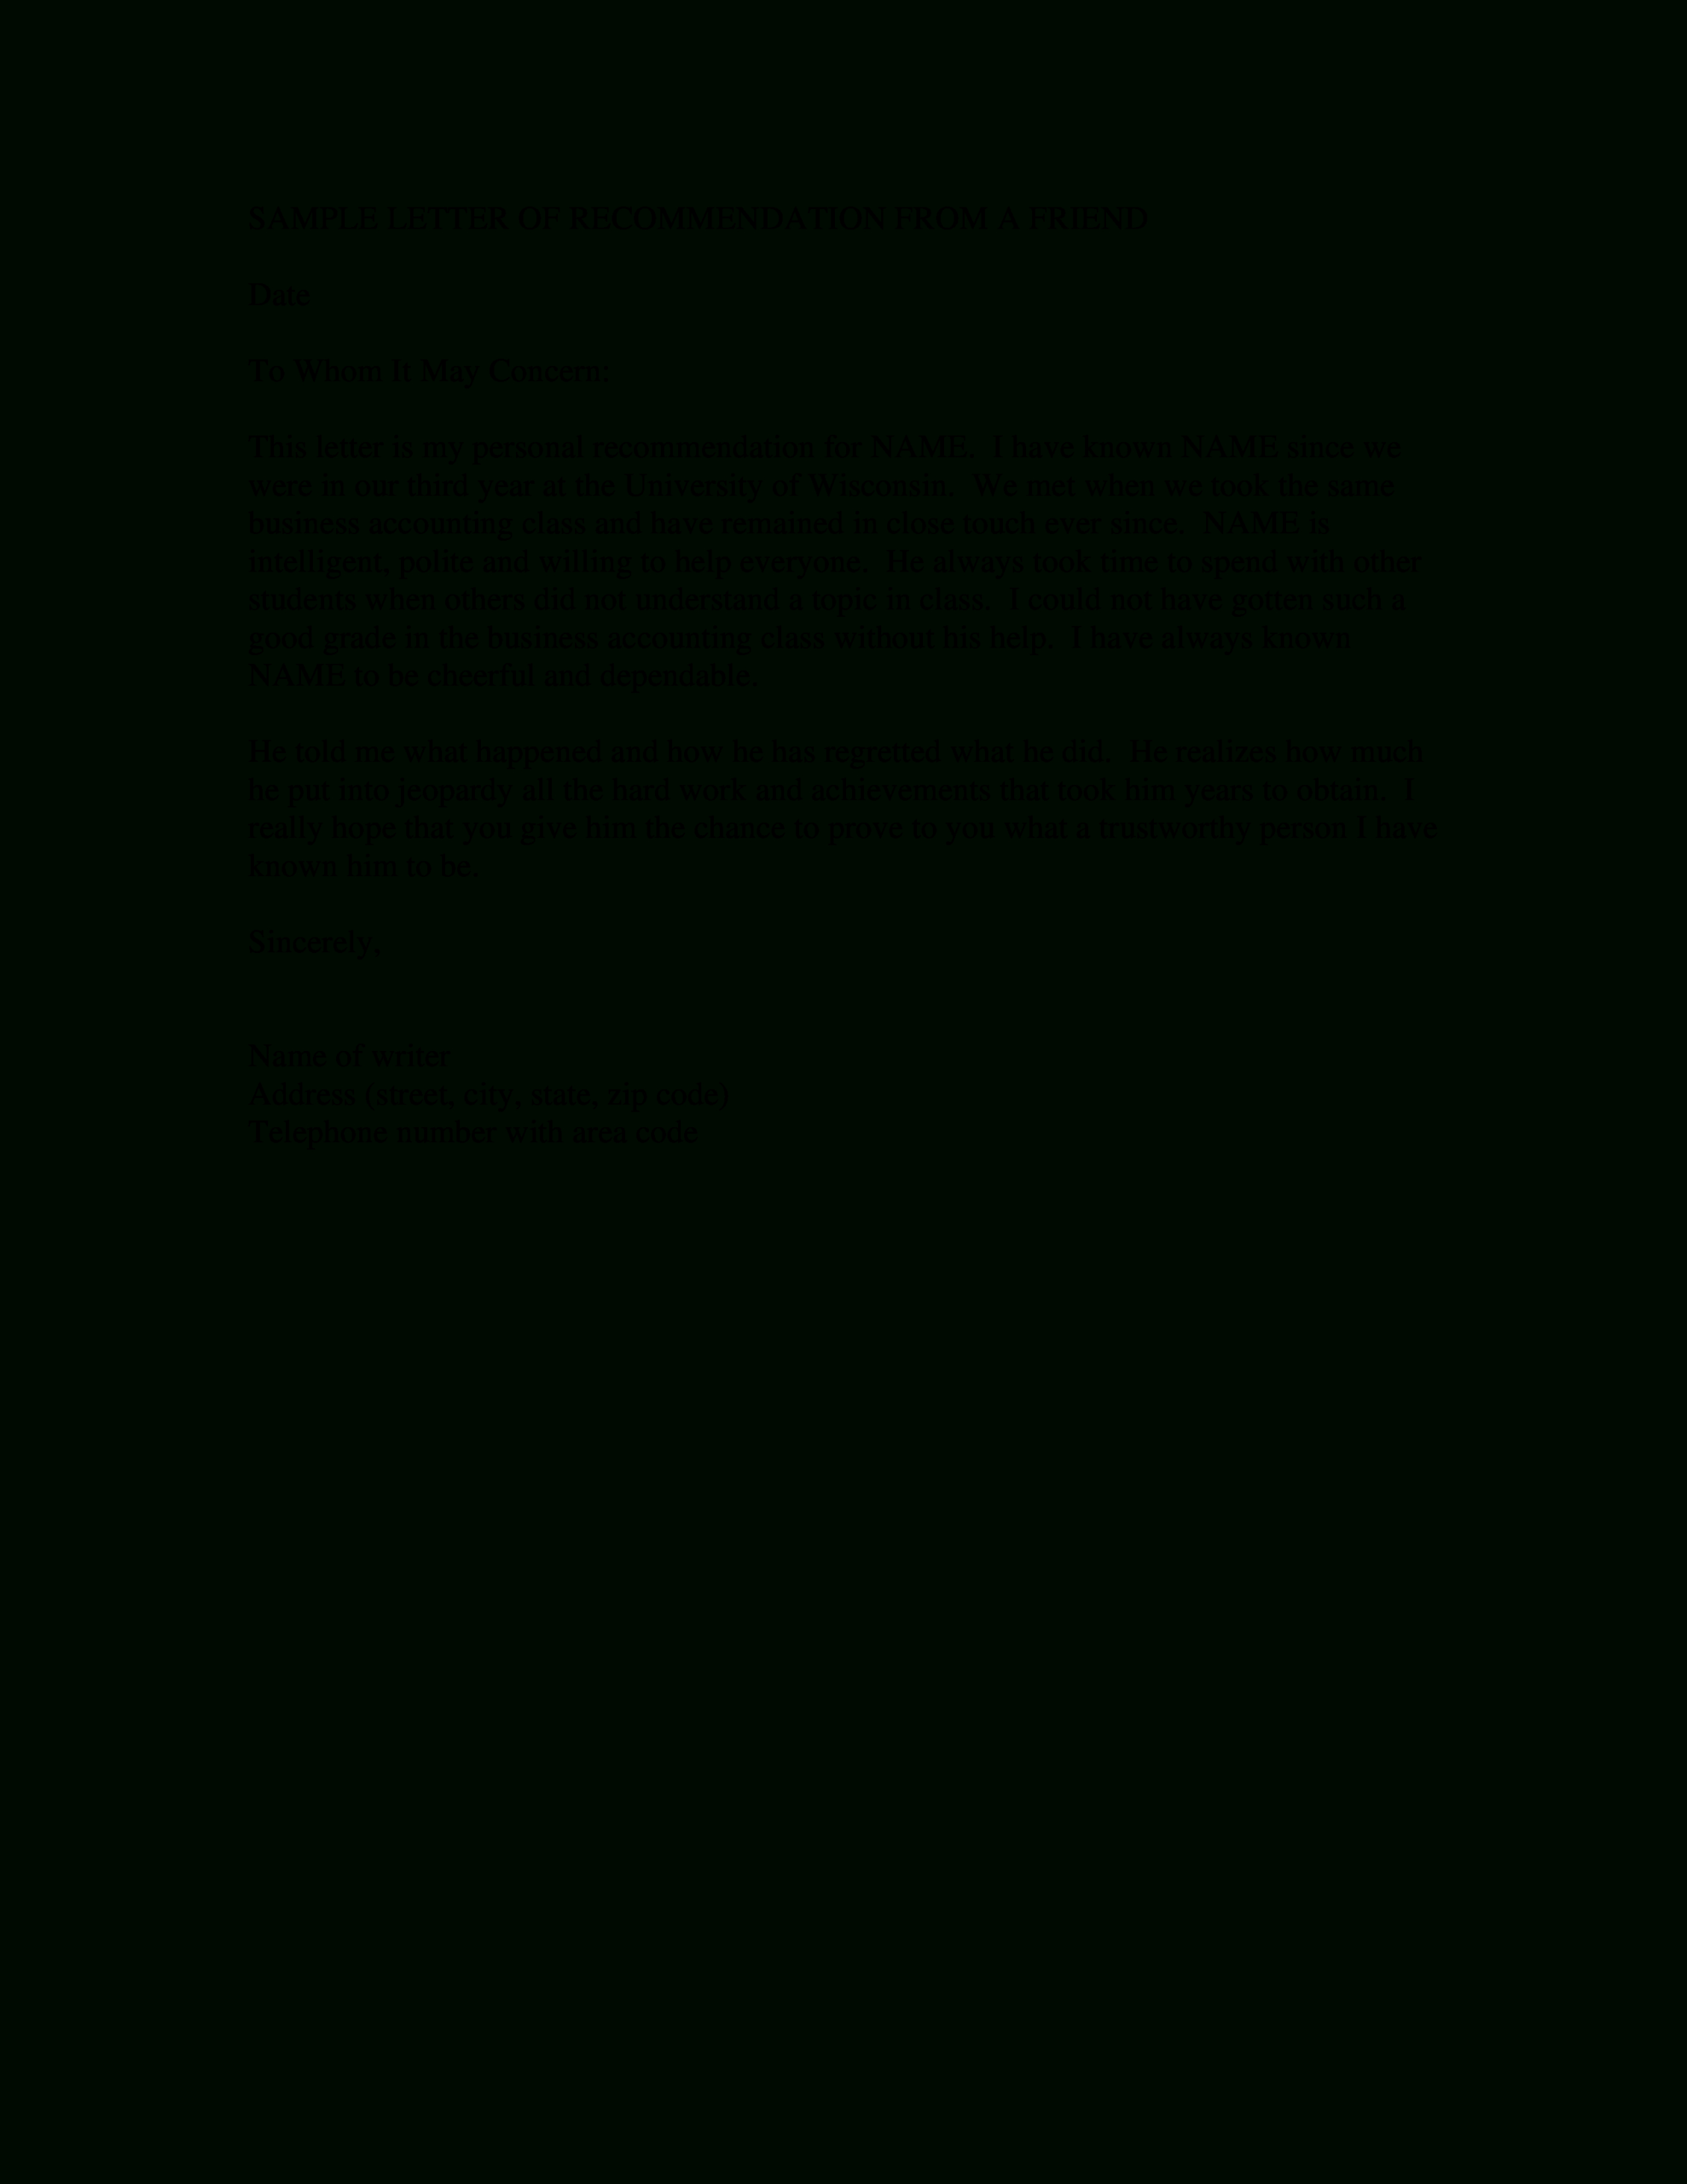 Sample Recommendation Letter From A Friend | Templates At In Letter Of Recommendation For A Friend Template